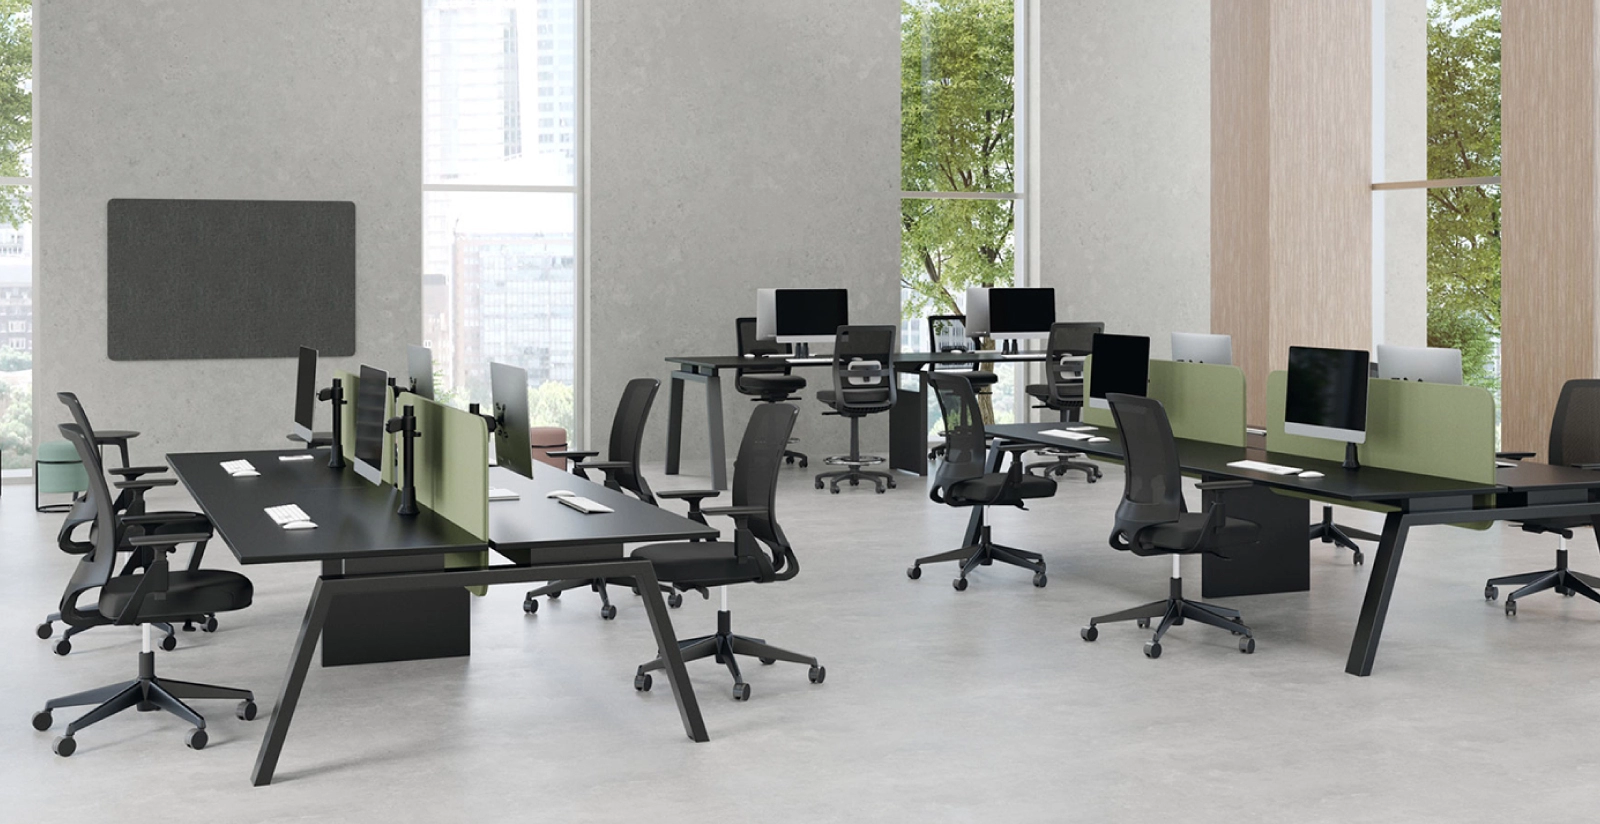 Office Furniture Malaysia, Over 28 Years Experience